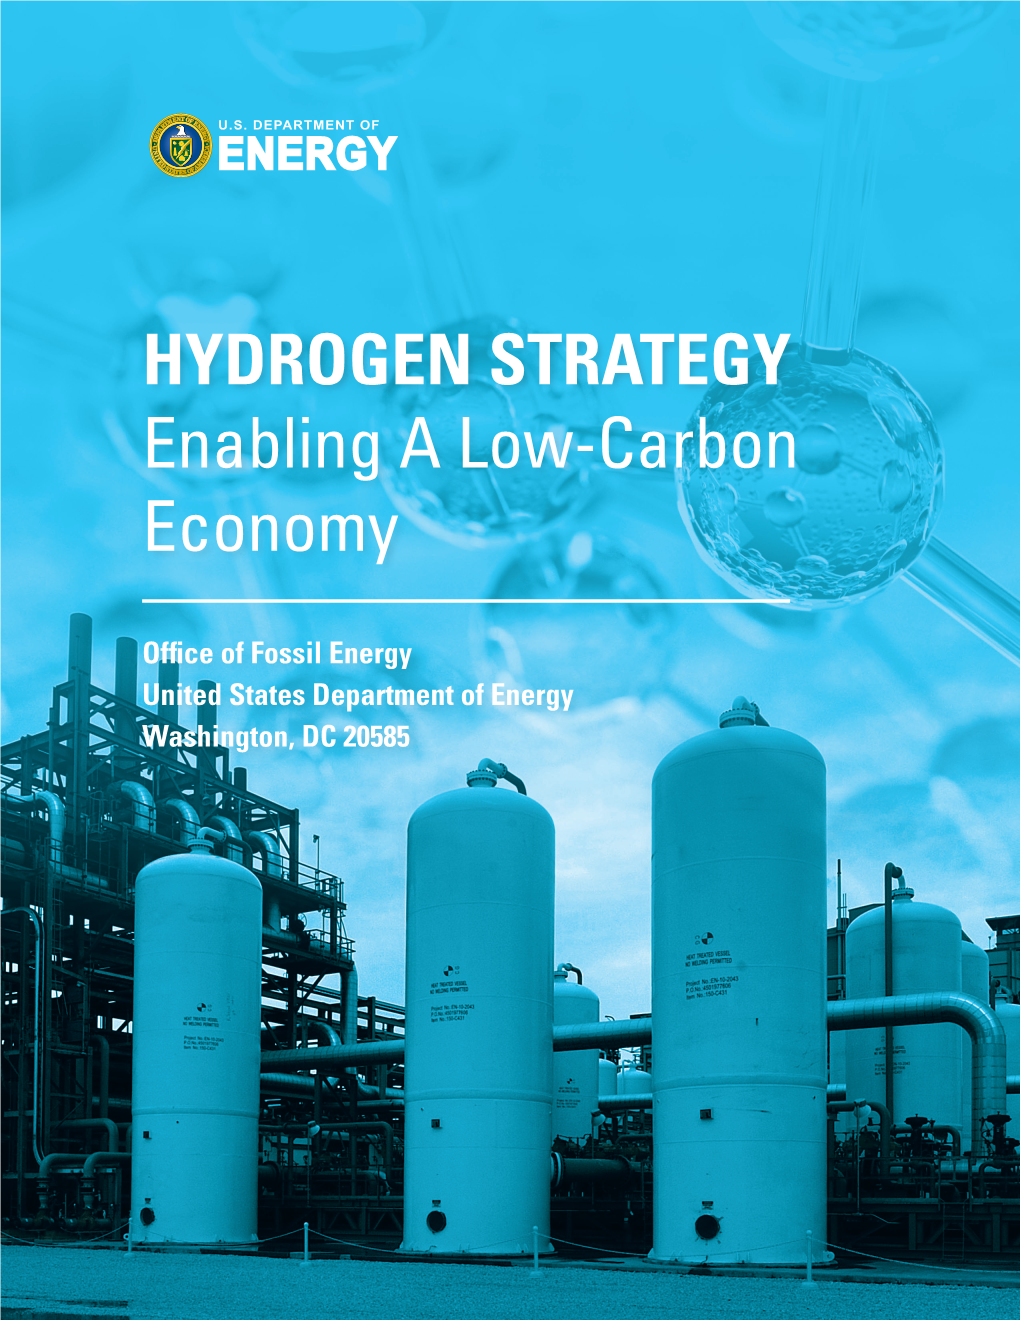 HYDROGEN STRATEGY Enabling a Low-Carbon Economy